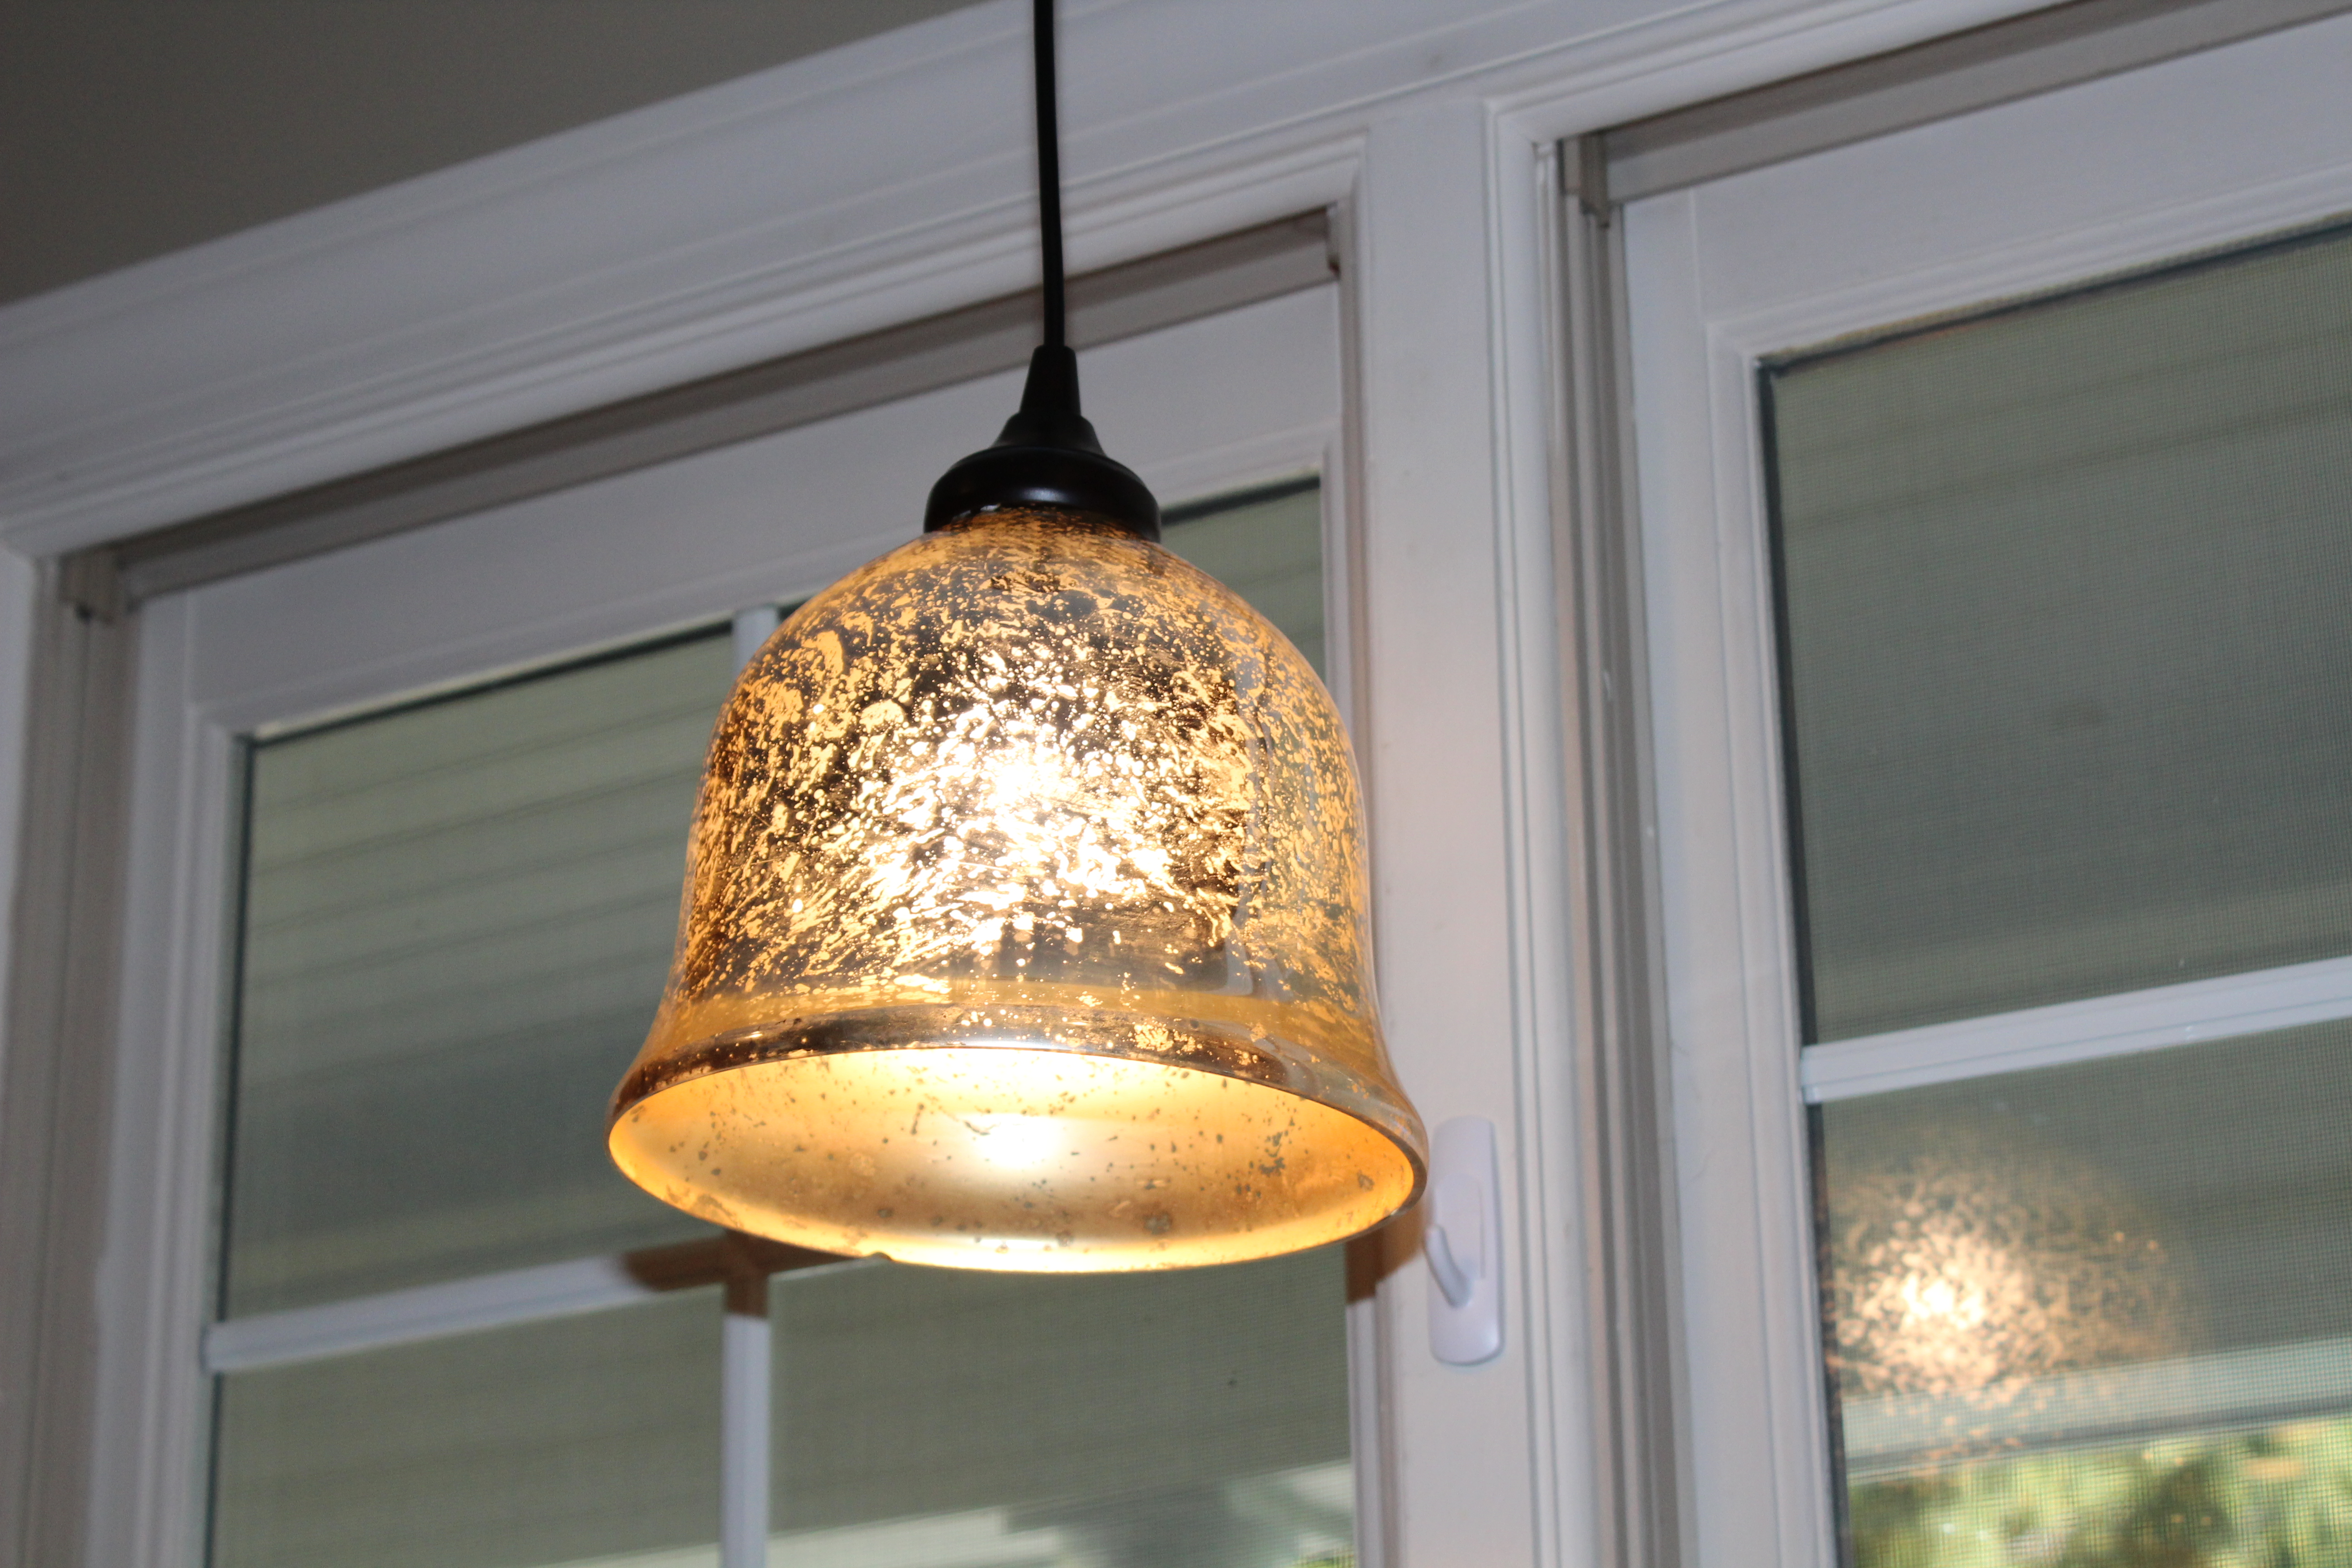 images of pendant light over kitchen sink